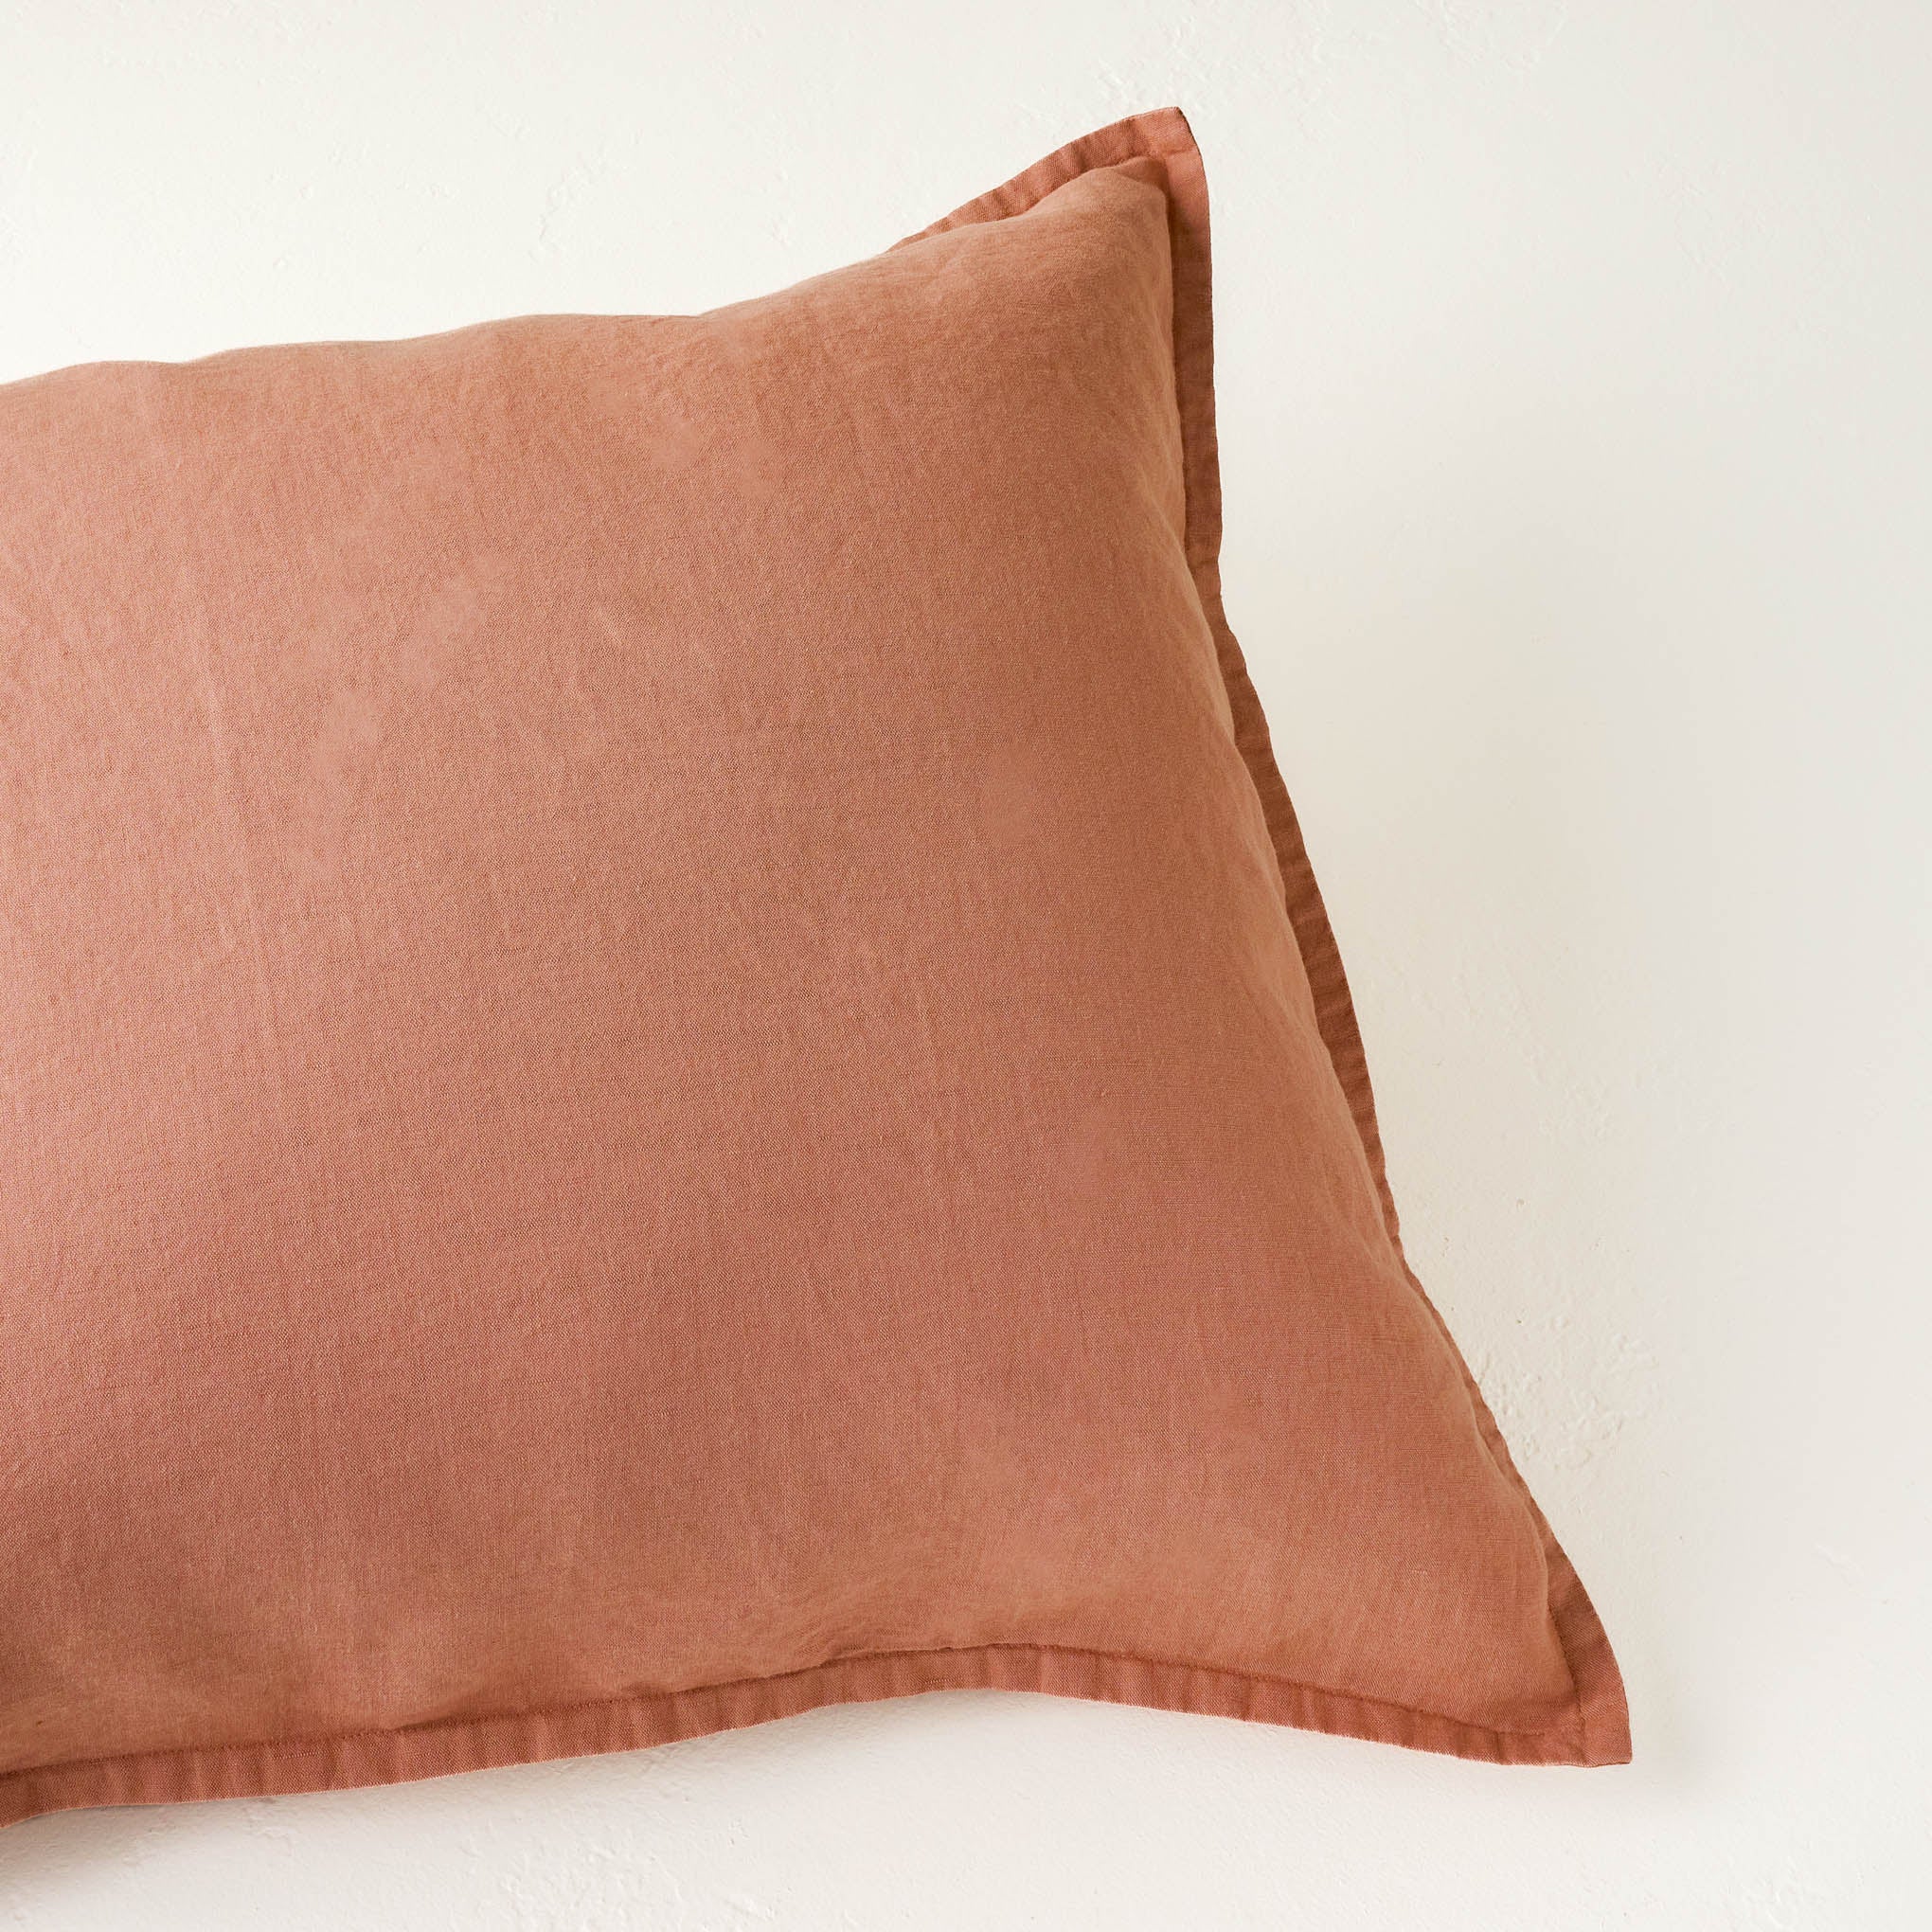 Top view of Desert Clay Washed Linen Cotton Pillow Sham Items range from $39.00 to $49.00